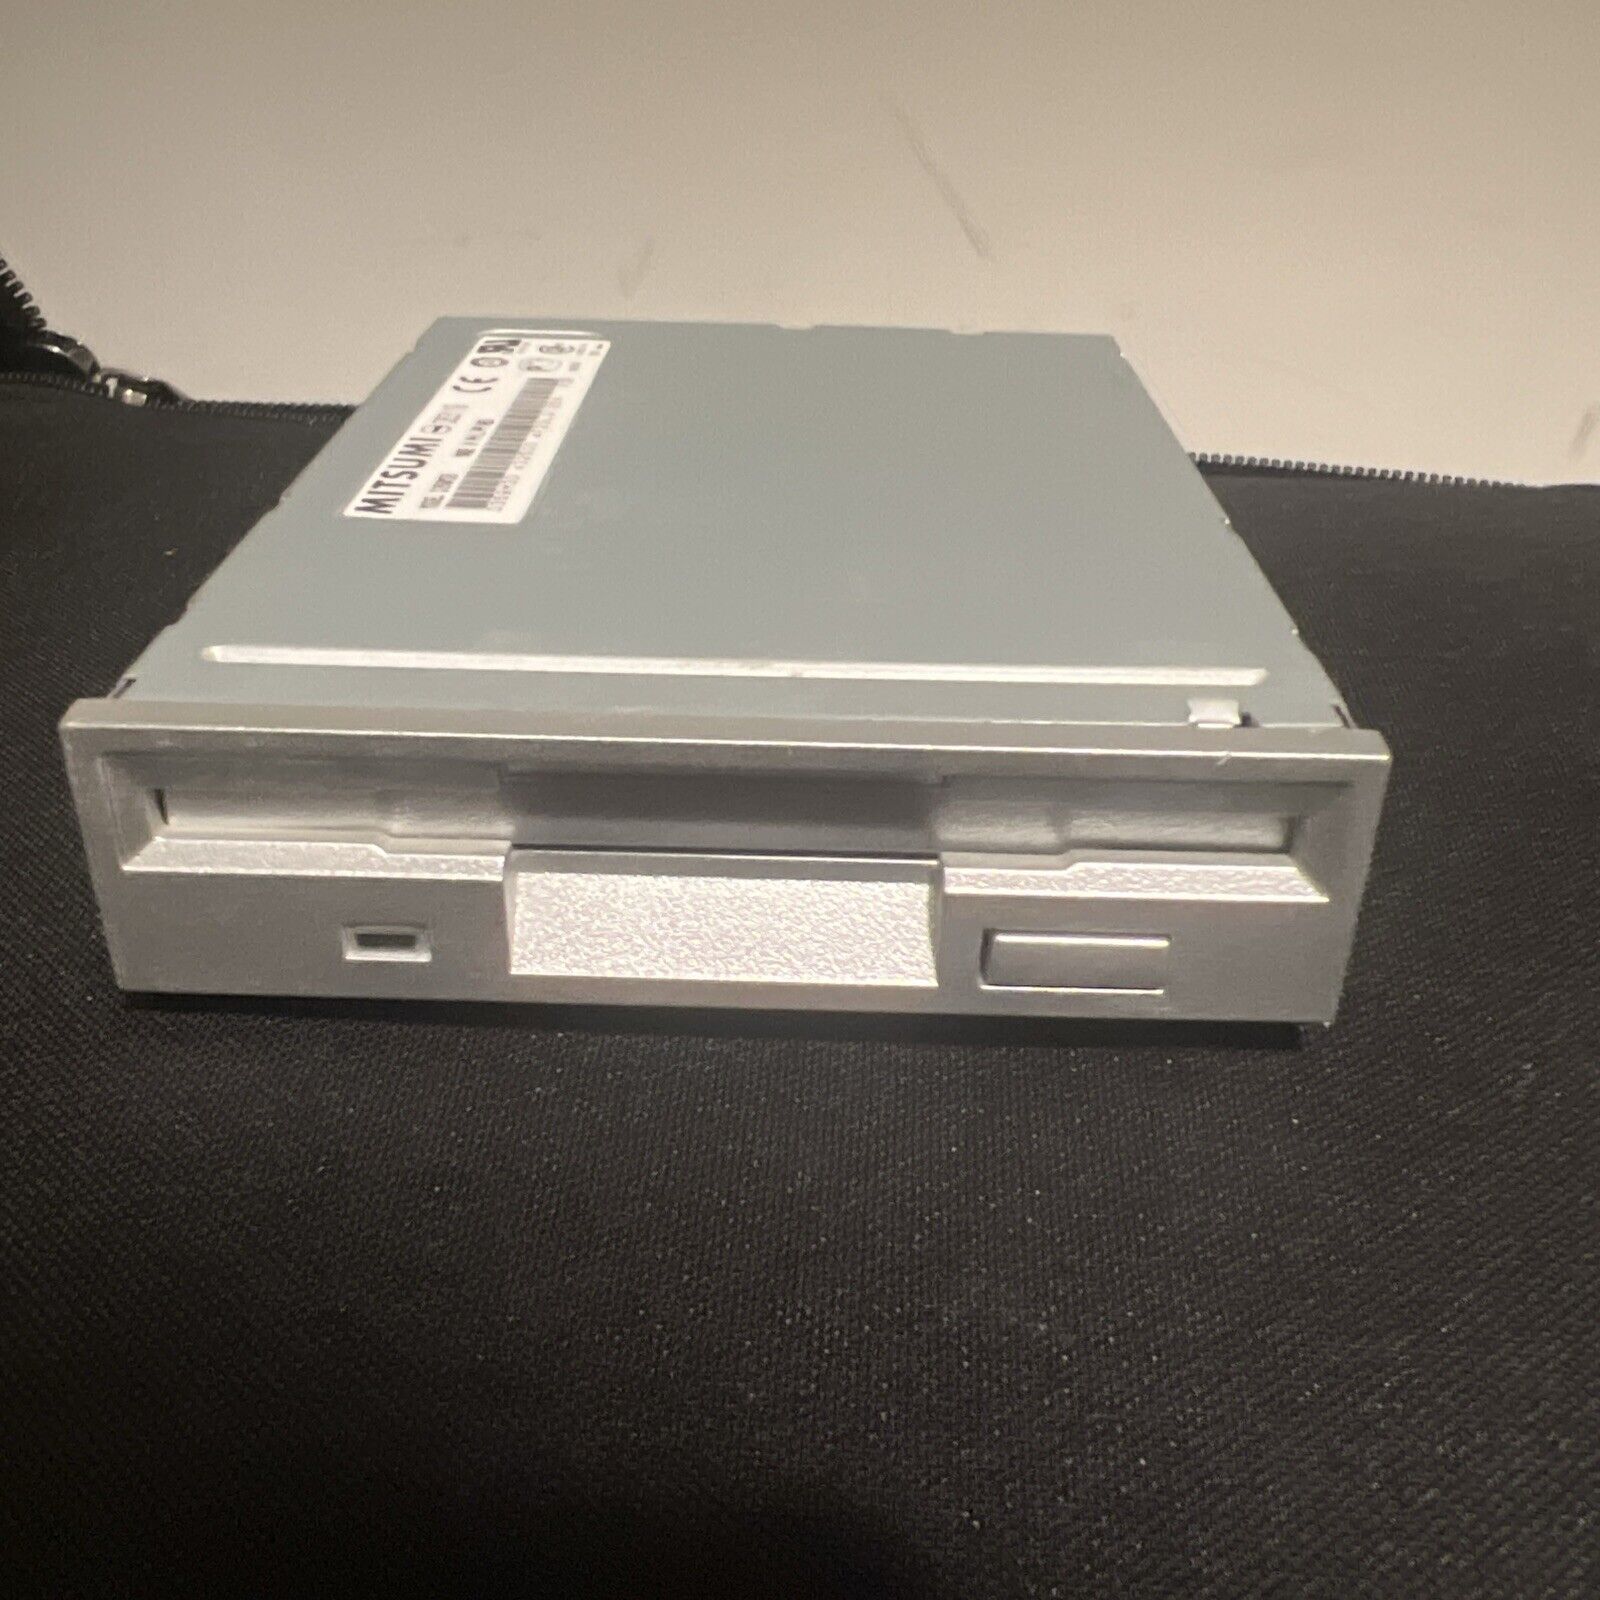 Mitsumi D359T5 3.5” 1.44 MB Floppy Disk Drive IDE FDD VINTAGE TESTED